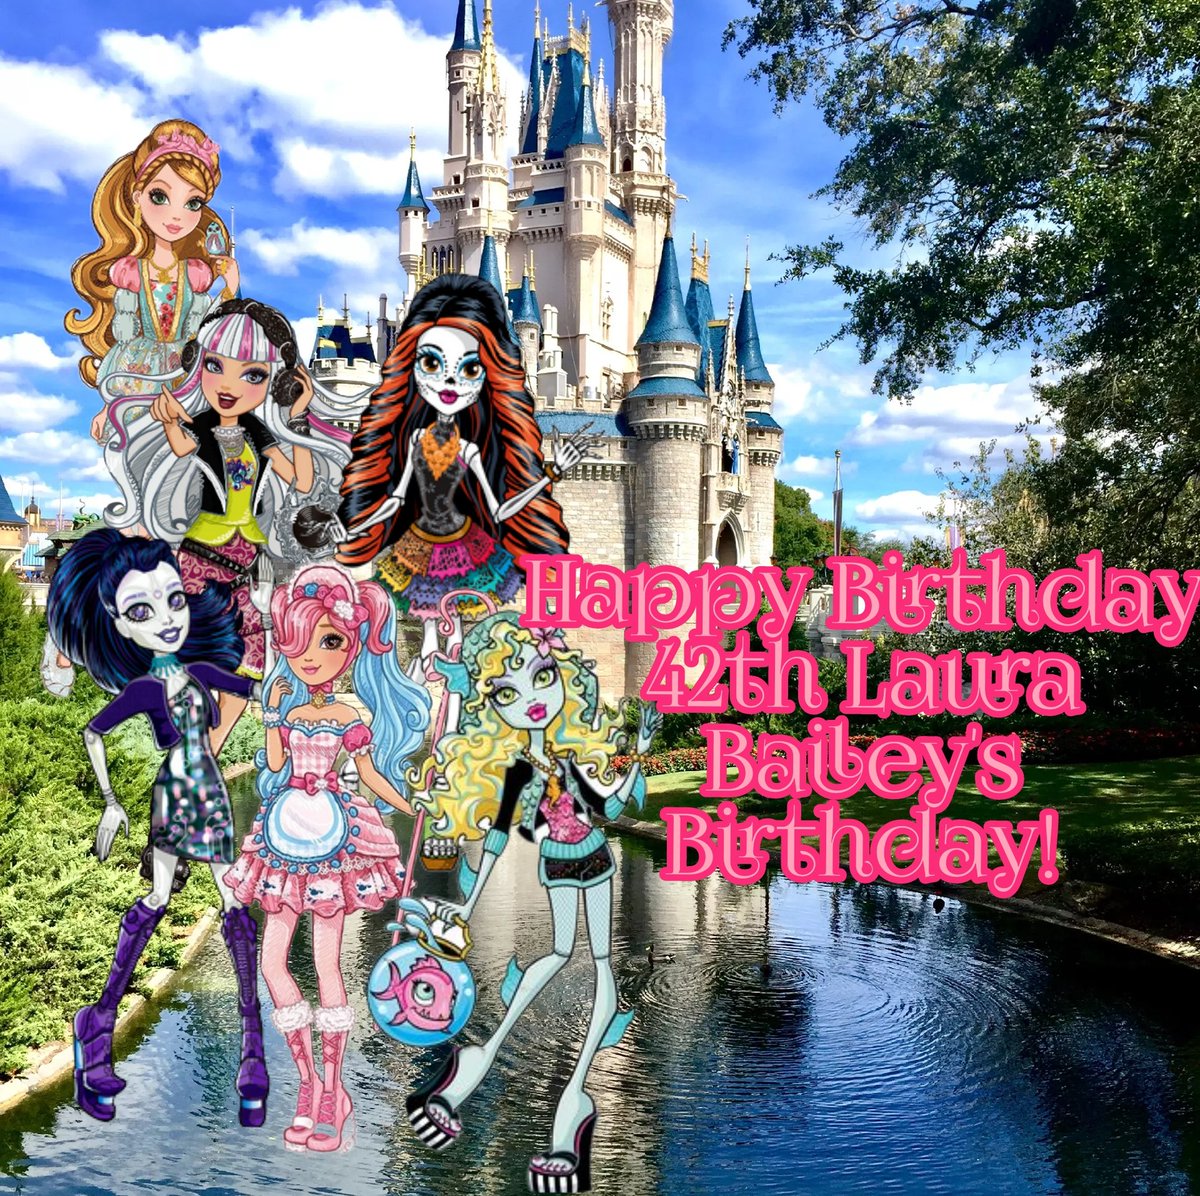 @jericollage70 @LauraBaileyVO @emeraldcitycon @WillingBlam Happy Birthday 42th @LauraBaileyVO! Of the Ever After High and Monster High to Ashlynn Ella, Melody Piper, Lagoona Blue, Elle Eedee, Skelita Calaveras and Lilly-Bo-Peep is for everyone!